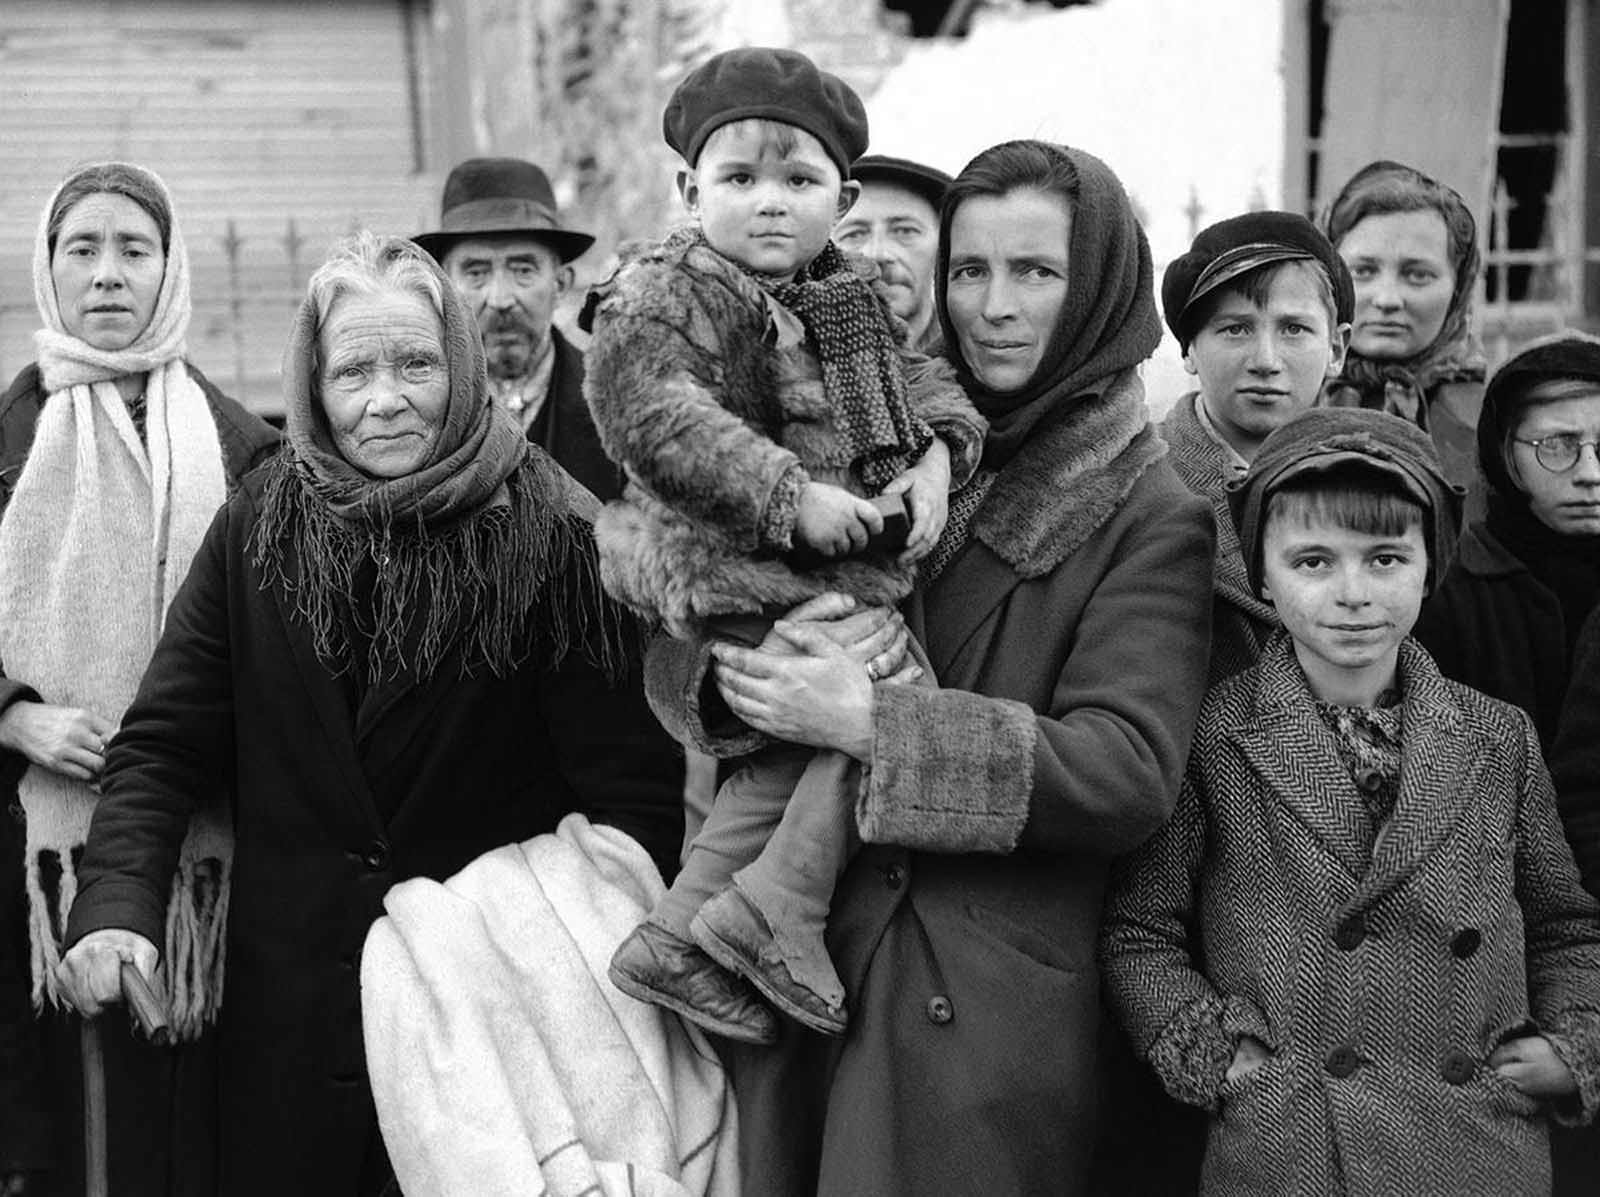 Refugees stand in a group in a street in La Gleize, Belgium on January 2, 1945, waiting to be transported from the war-torn town after its recapture by American Forces during the German thrust in the Belgium-Luxembourg salient.